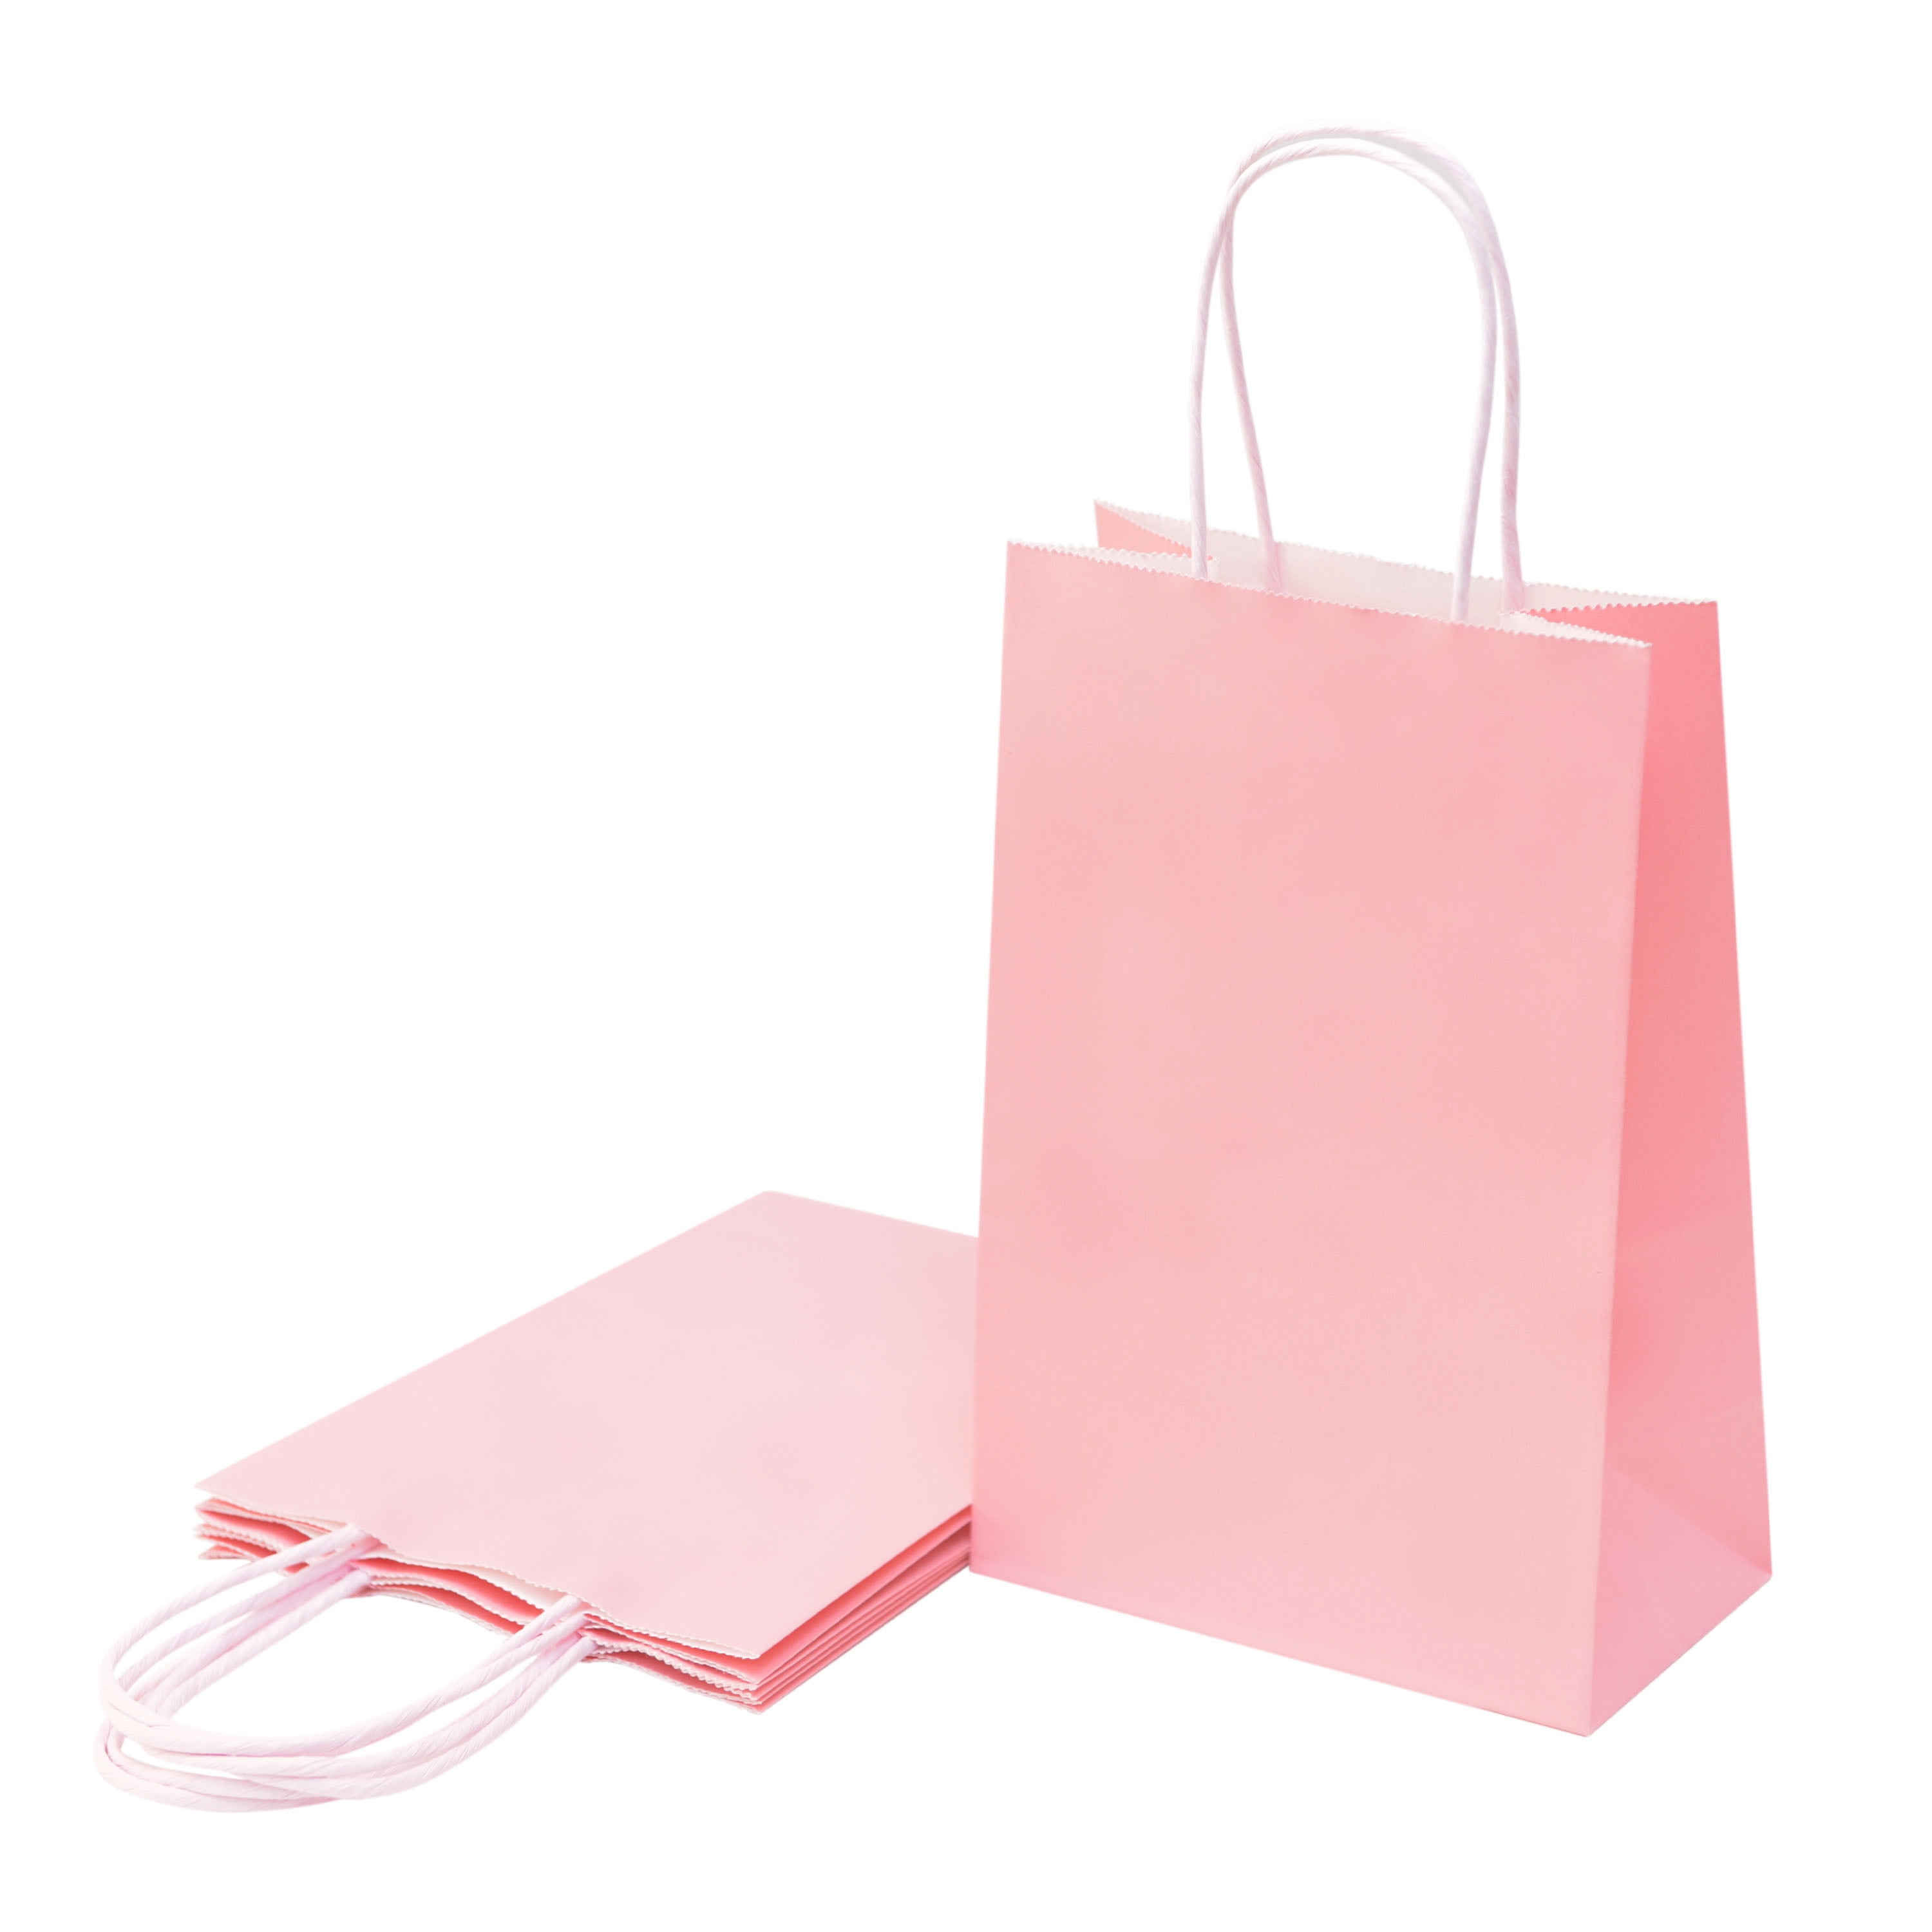 Fay People Pink Gift Bags with Handles - 4pk Medium Gift Bags with Tissue  Paper, Over 15 Design Options for Unusual Funny Gifts